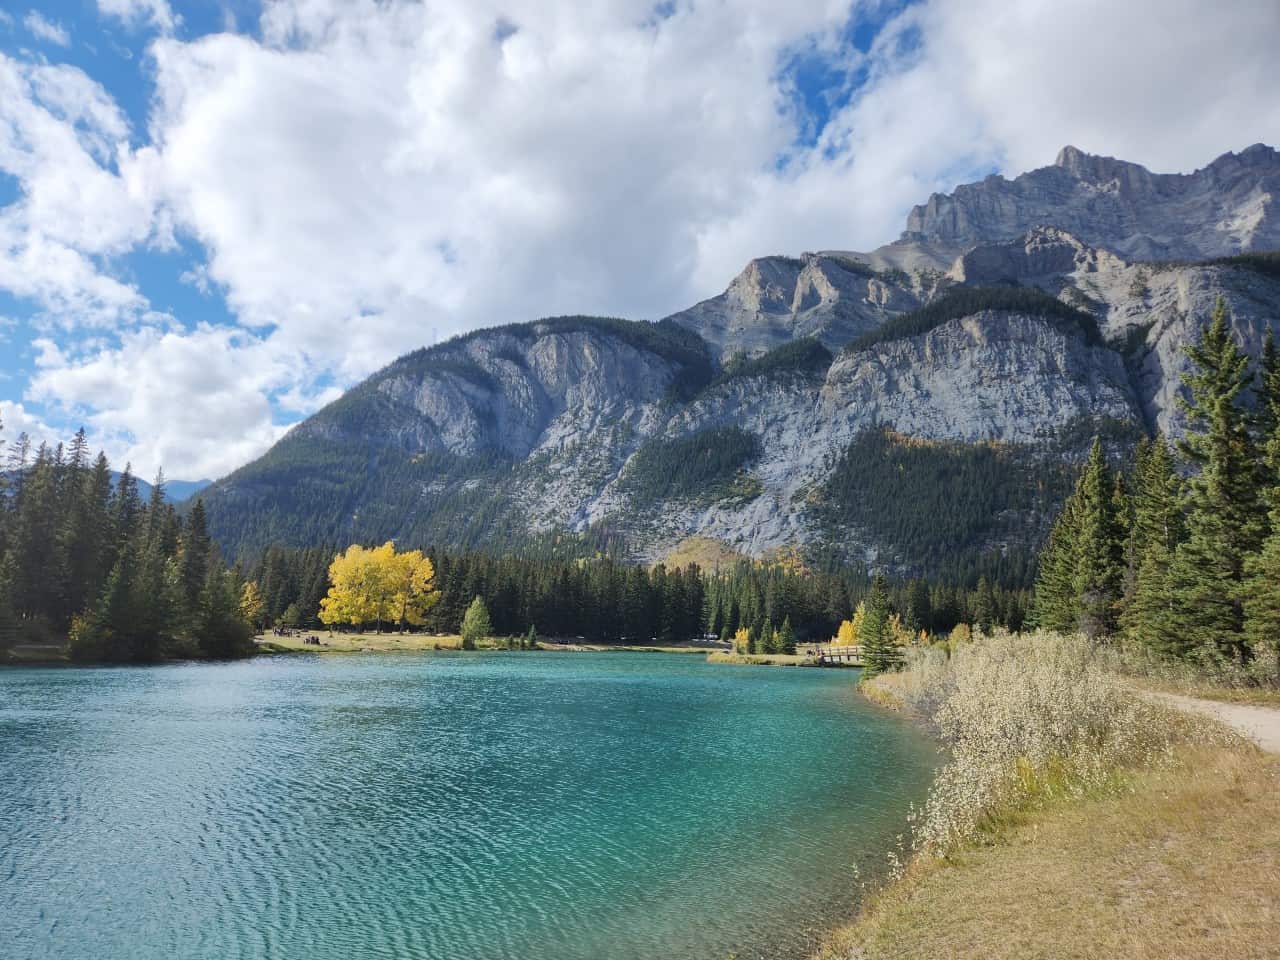 6 Reasons You Should Visit CASCADE PONDS in Banff